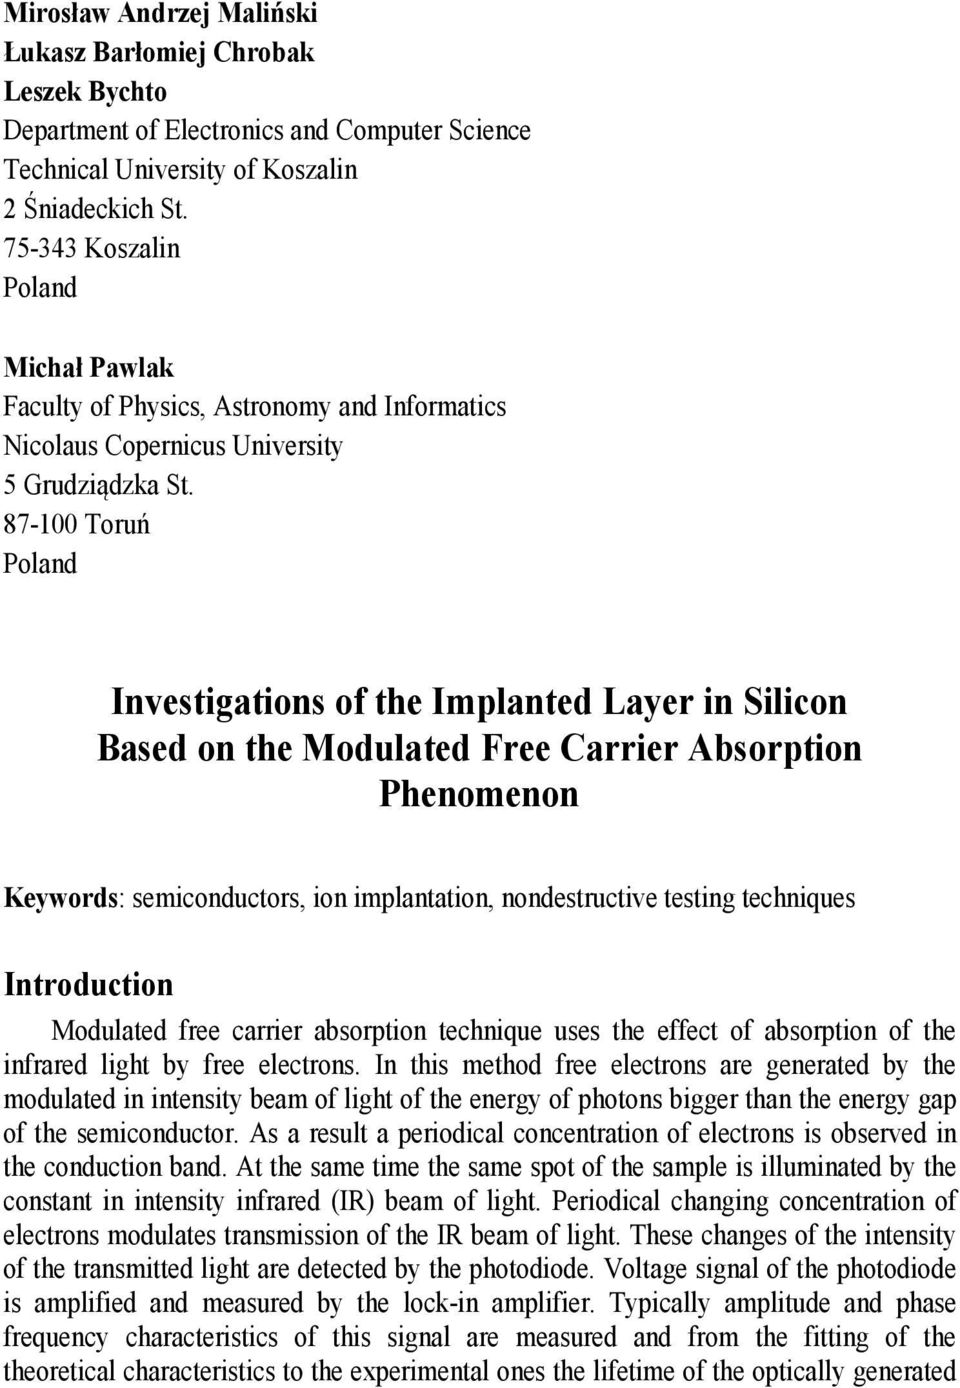 87-00 Torń Poland Investigations of the Implanted Laer in Silicon Based on the Modlated Free Carrier Absorption Phenomenon Kewords: semicondctors, ion implantation, nondestrctive testing techniqes